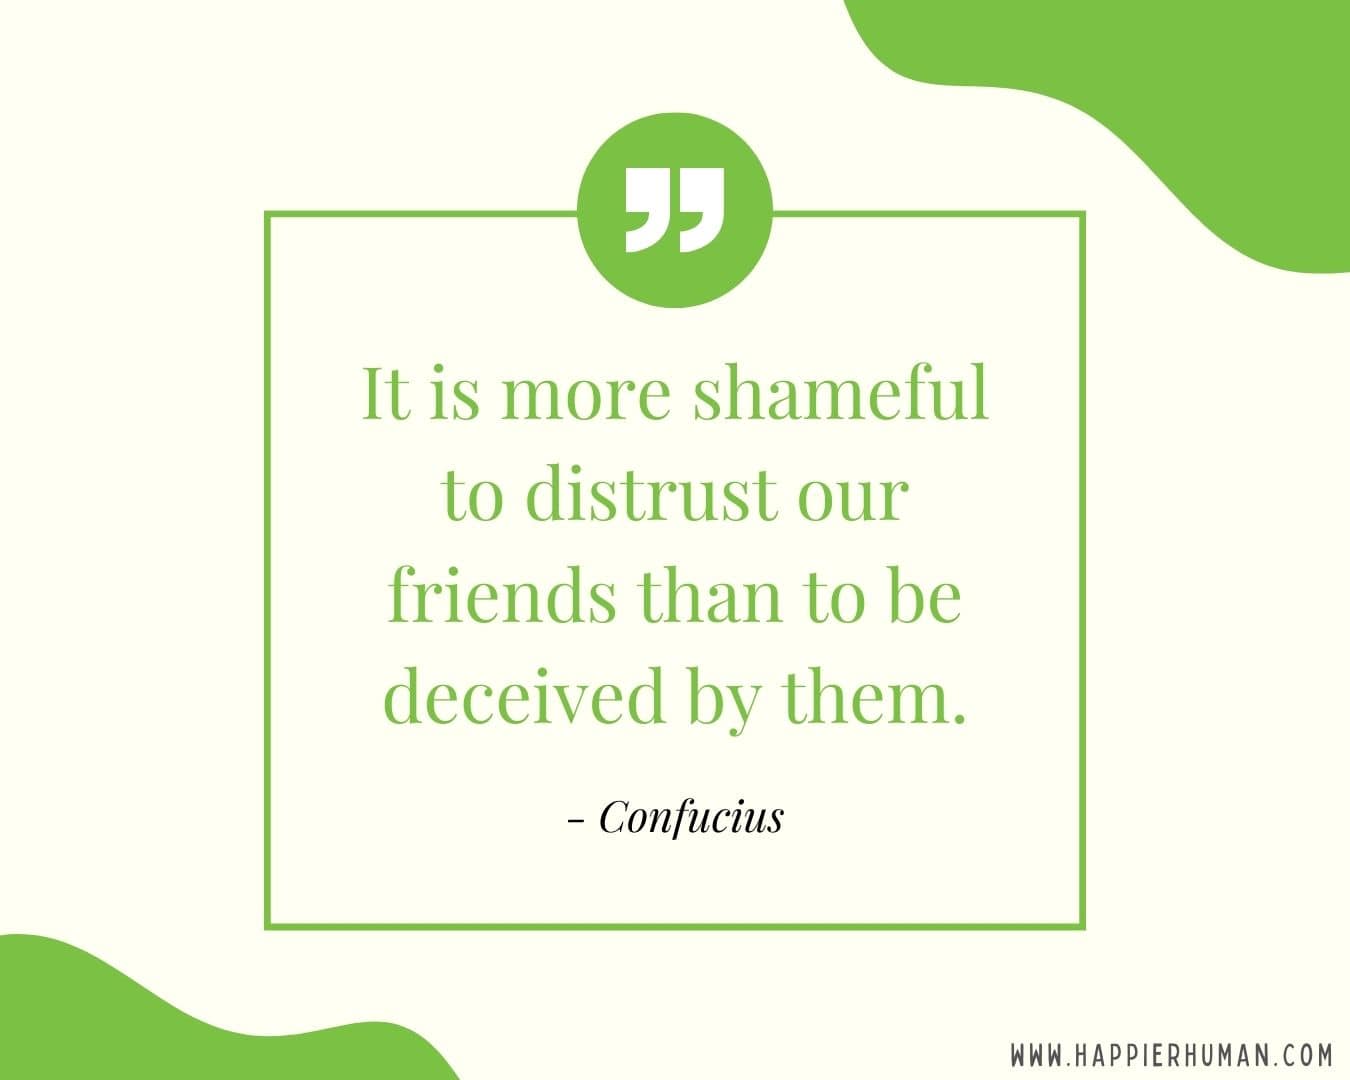 Broken Trust Quotes - “It is more shameful to distrust our friends than to be deceived by them.” - Confucius